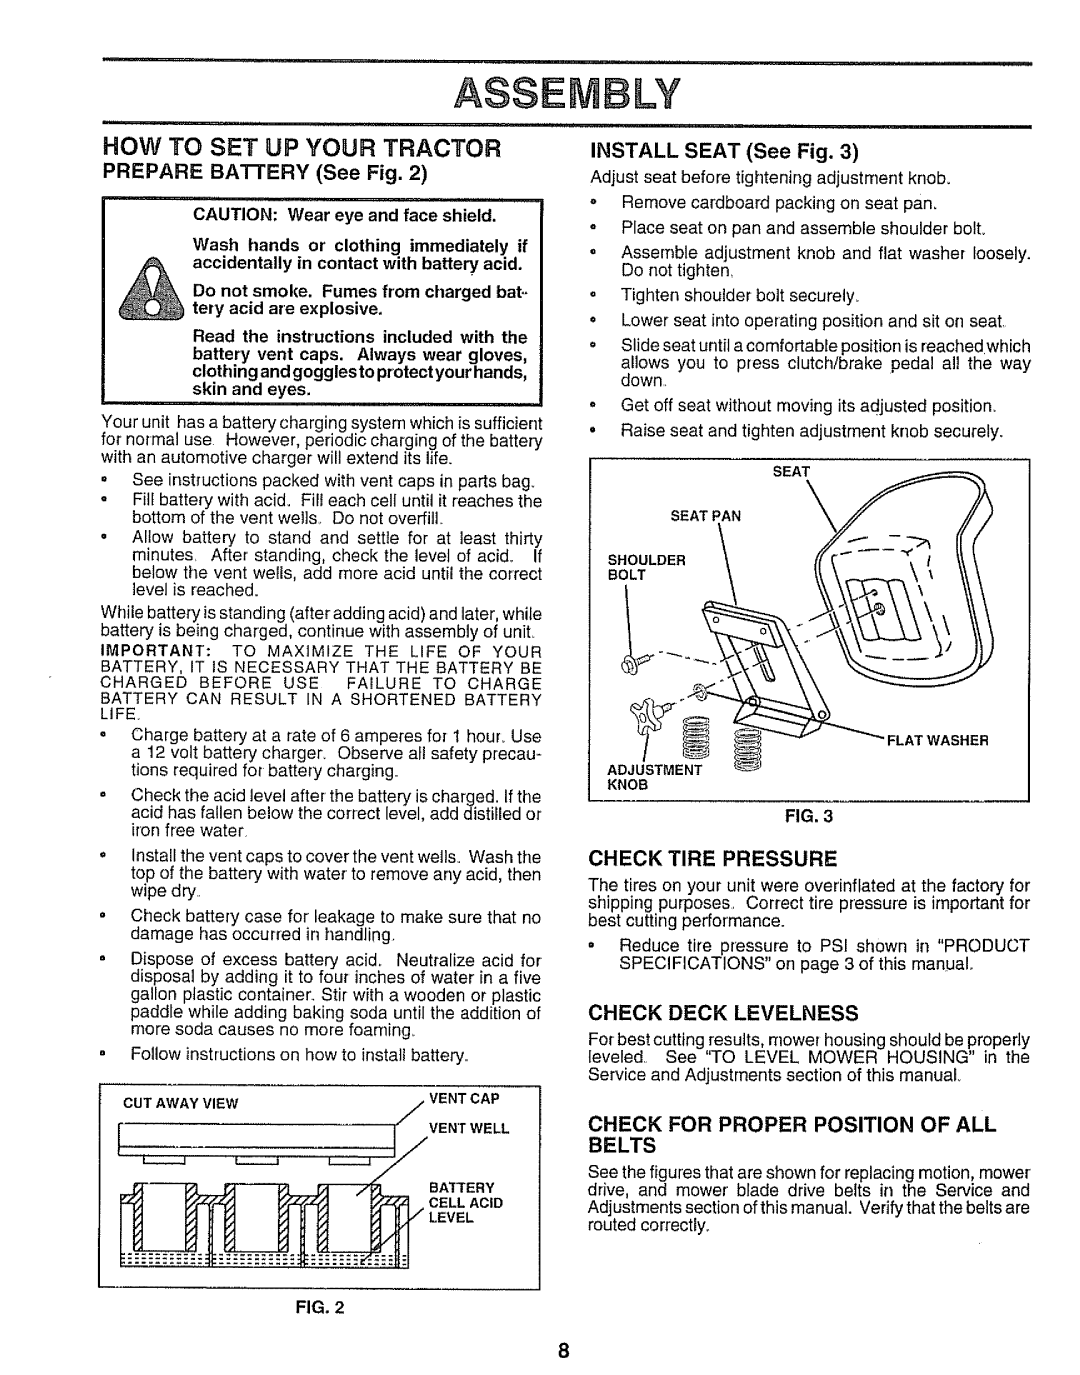 Sears 917.25545 Asse Ly, How To Set Up Your Tractor, PREPARE BAI-rERYSee Fig, Check Tire Pressure, Check Deck Levelness 